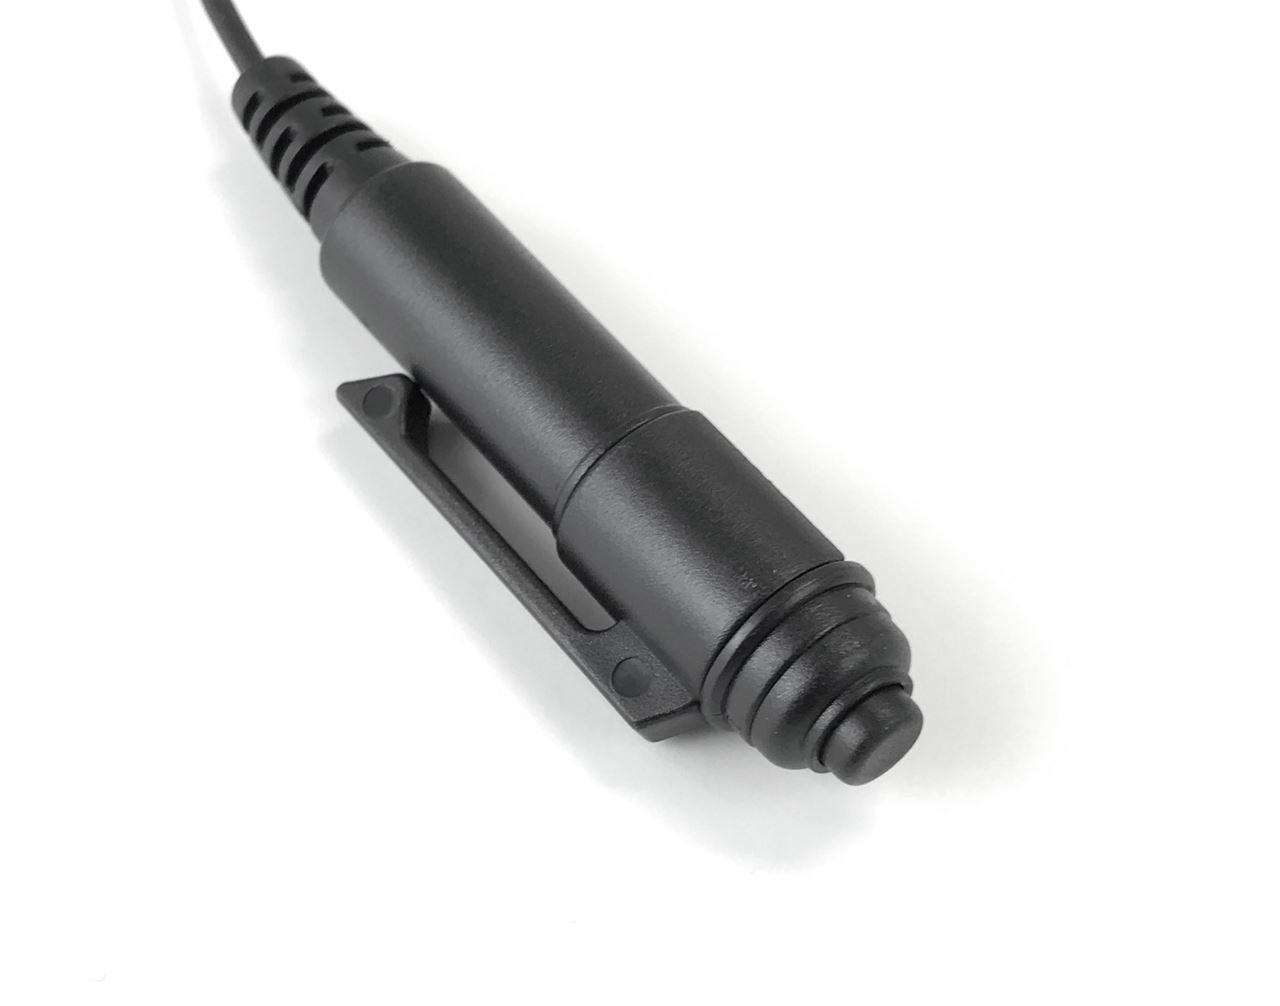 Comparable KHS-12 3 wire mini lapel mic with earphone for use with the Kenwood NX-5410d Portable Radio - Waveband Communications